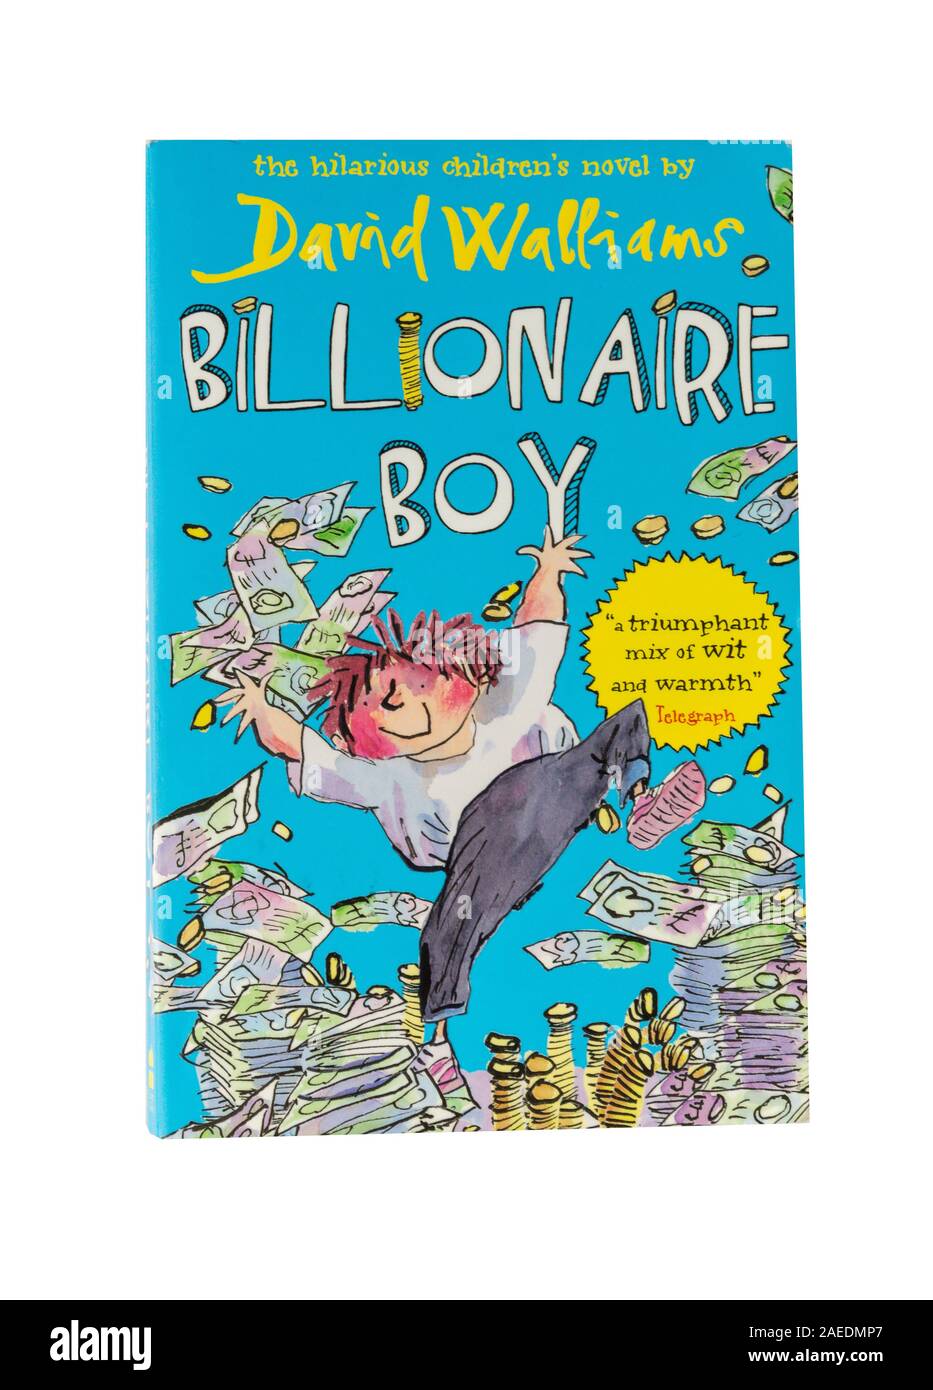 David Walliams milliardaire 'Boy' children's book, Greater London, Angleterre, Royaume-Uni Banque D'Images